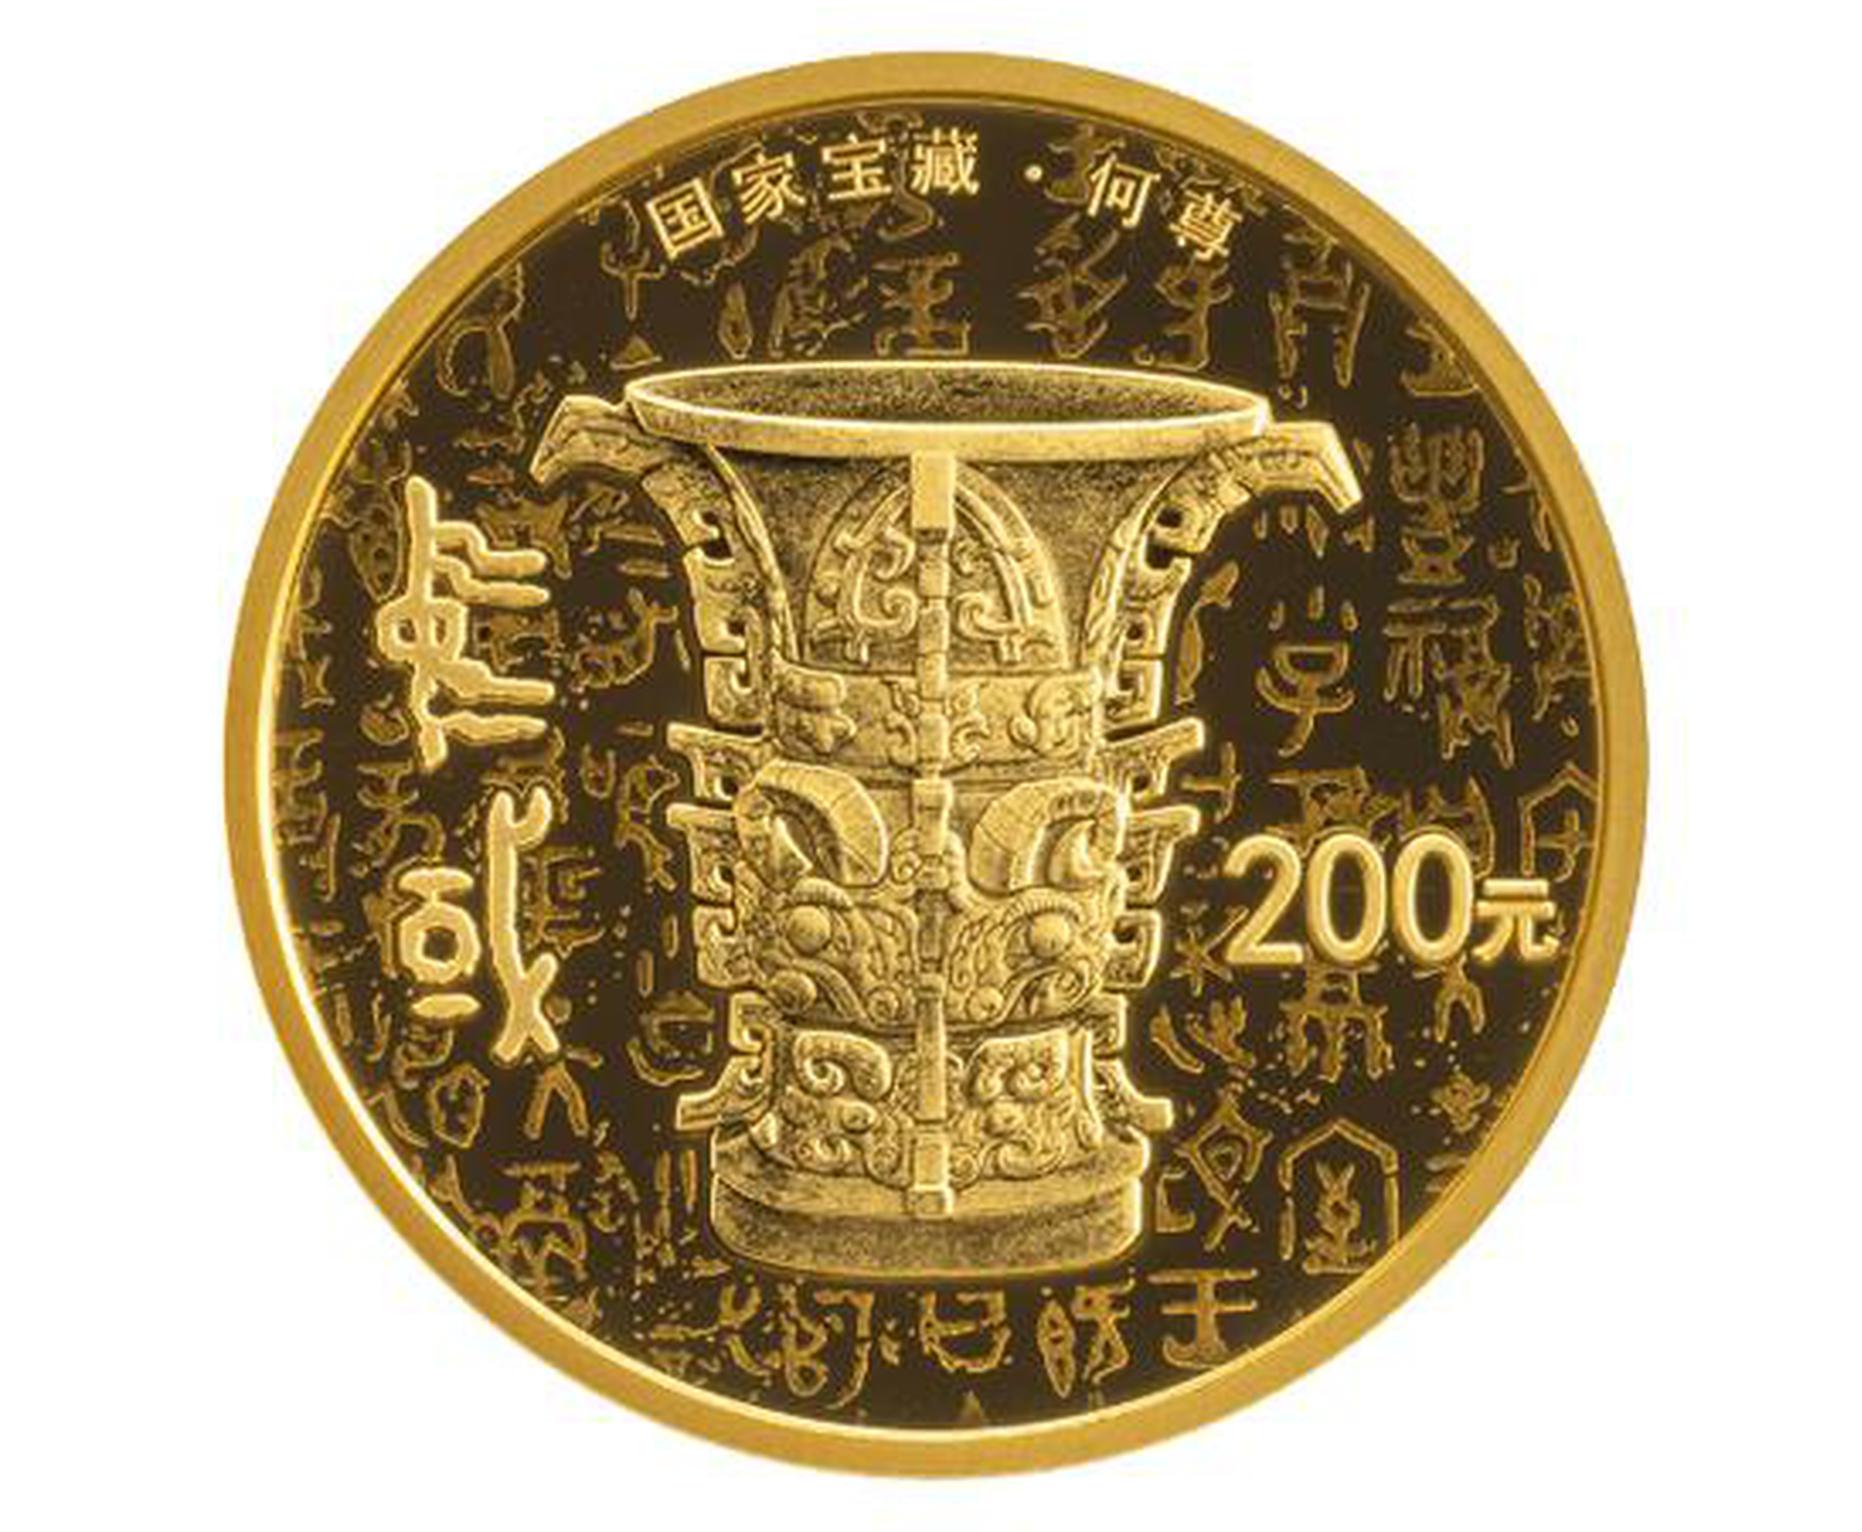 People's Bank of China to issue National Treasure-themed commemorative coins